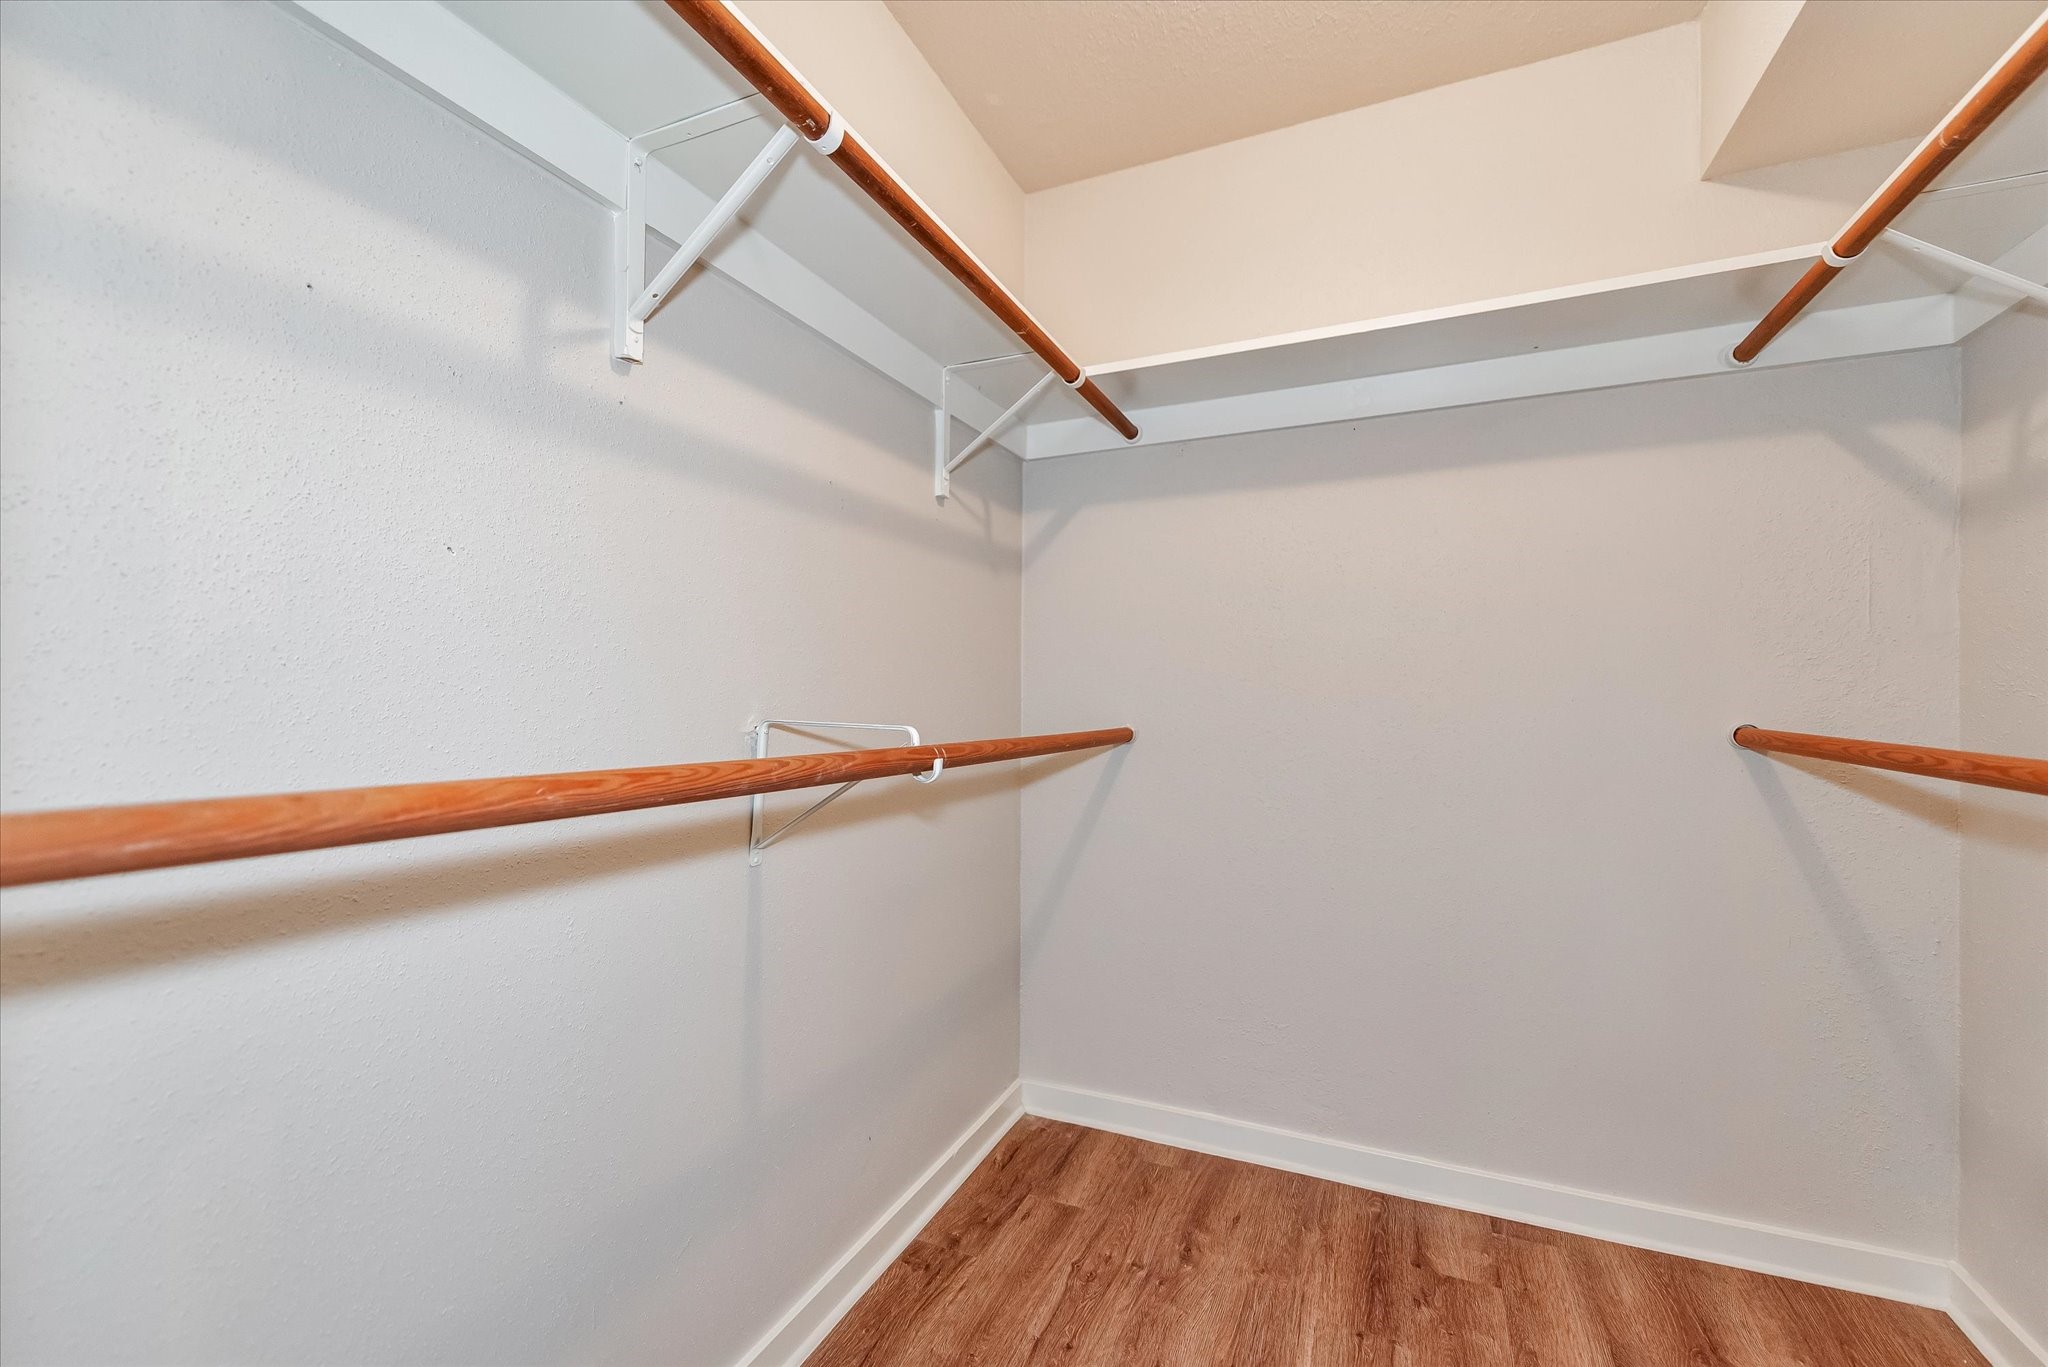 Primary closet, super clean and ready for excellent storage.